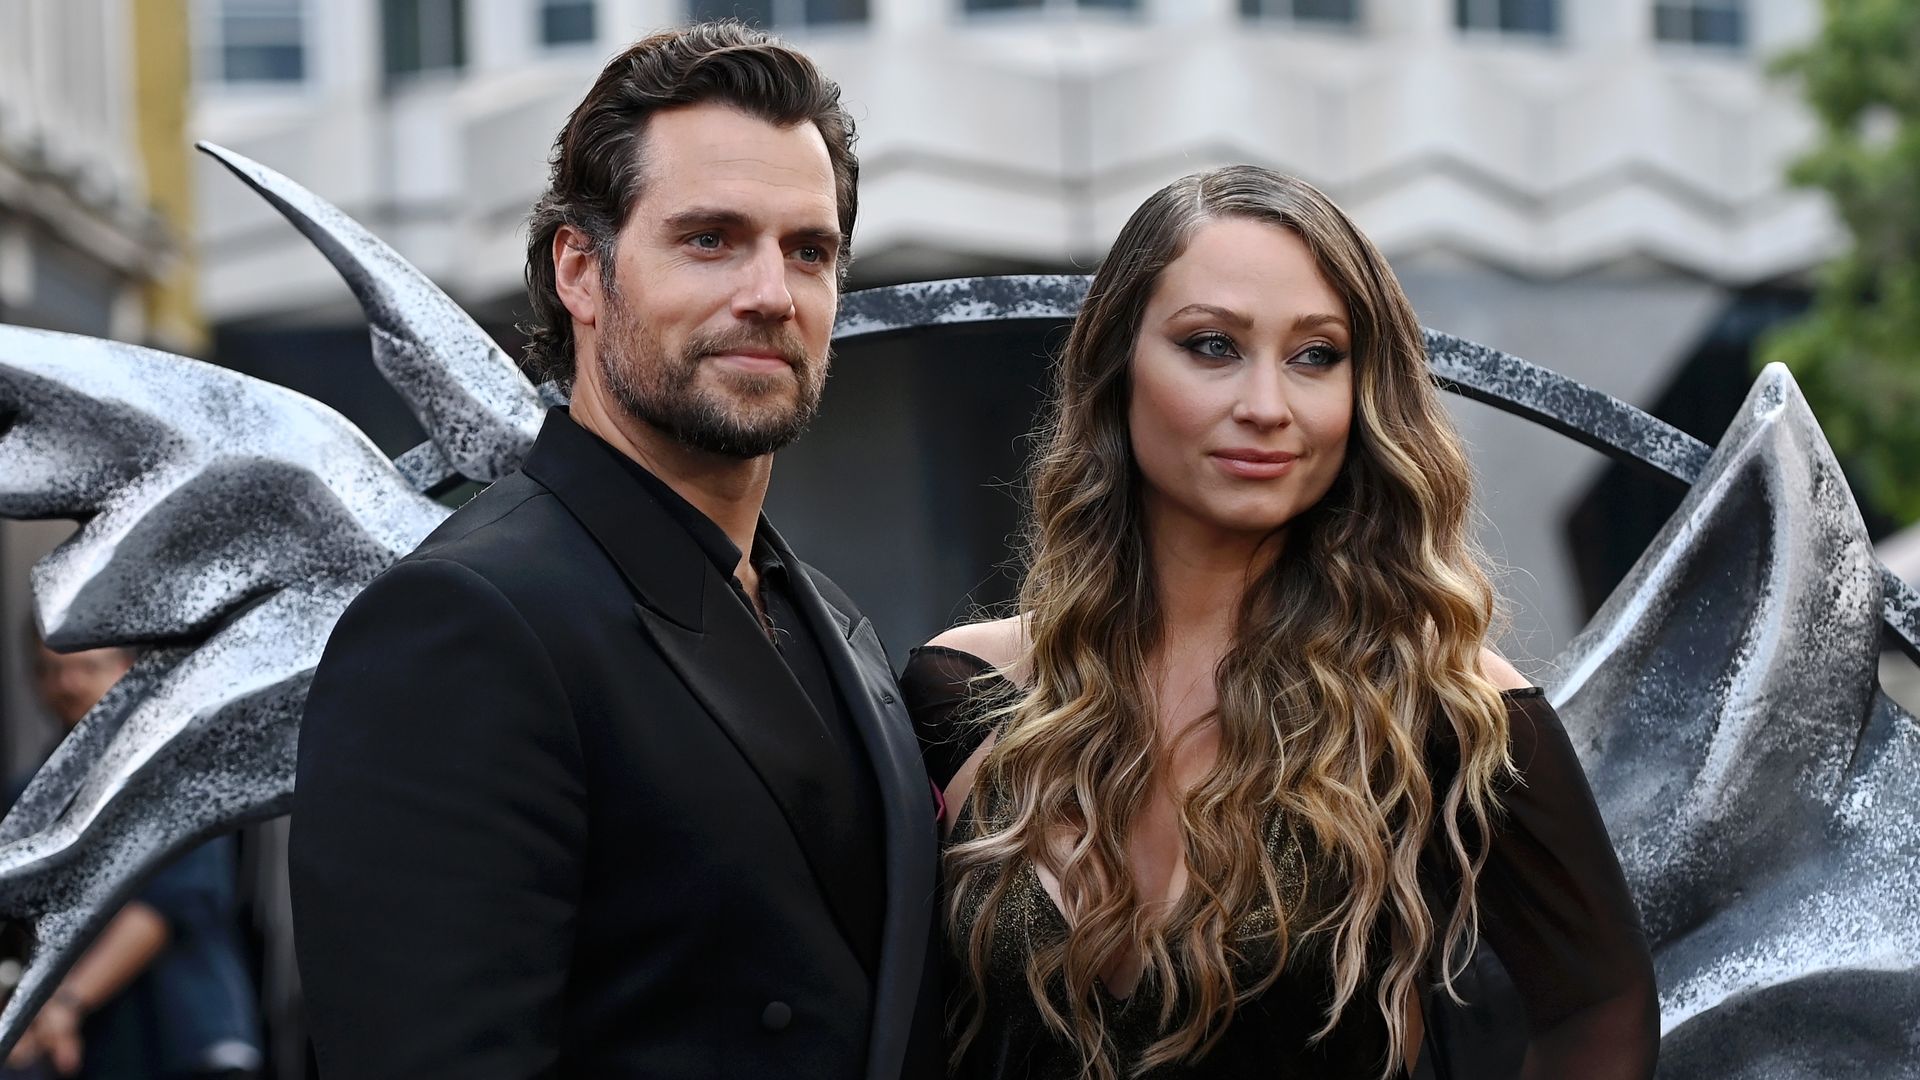 Who is Henry Cavill's pregnant girlfriend? All about Natalie Viscuso and their relationship timeline